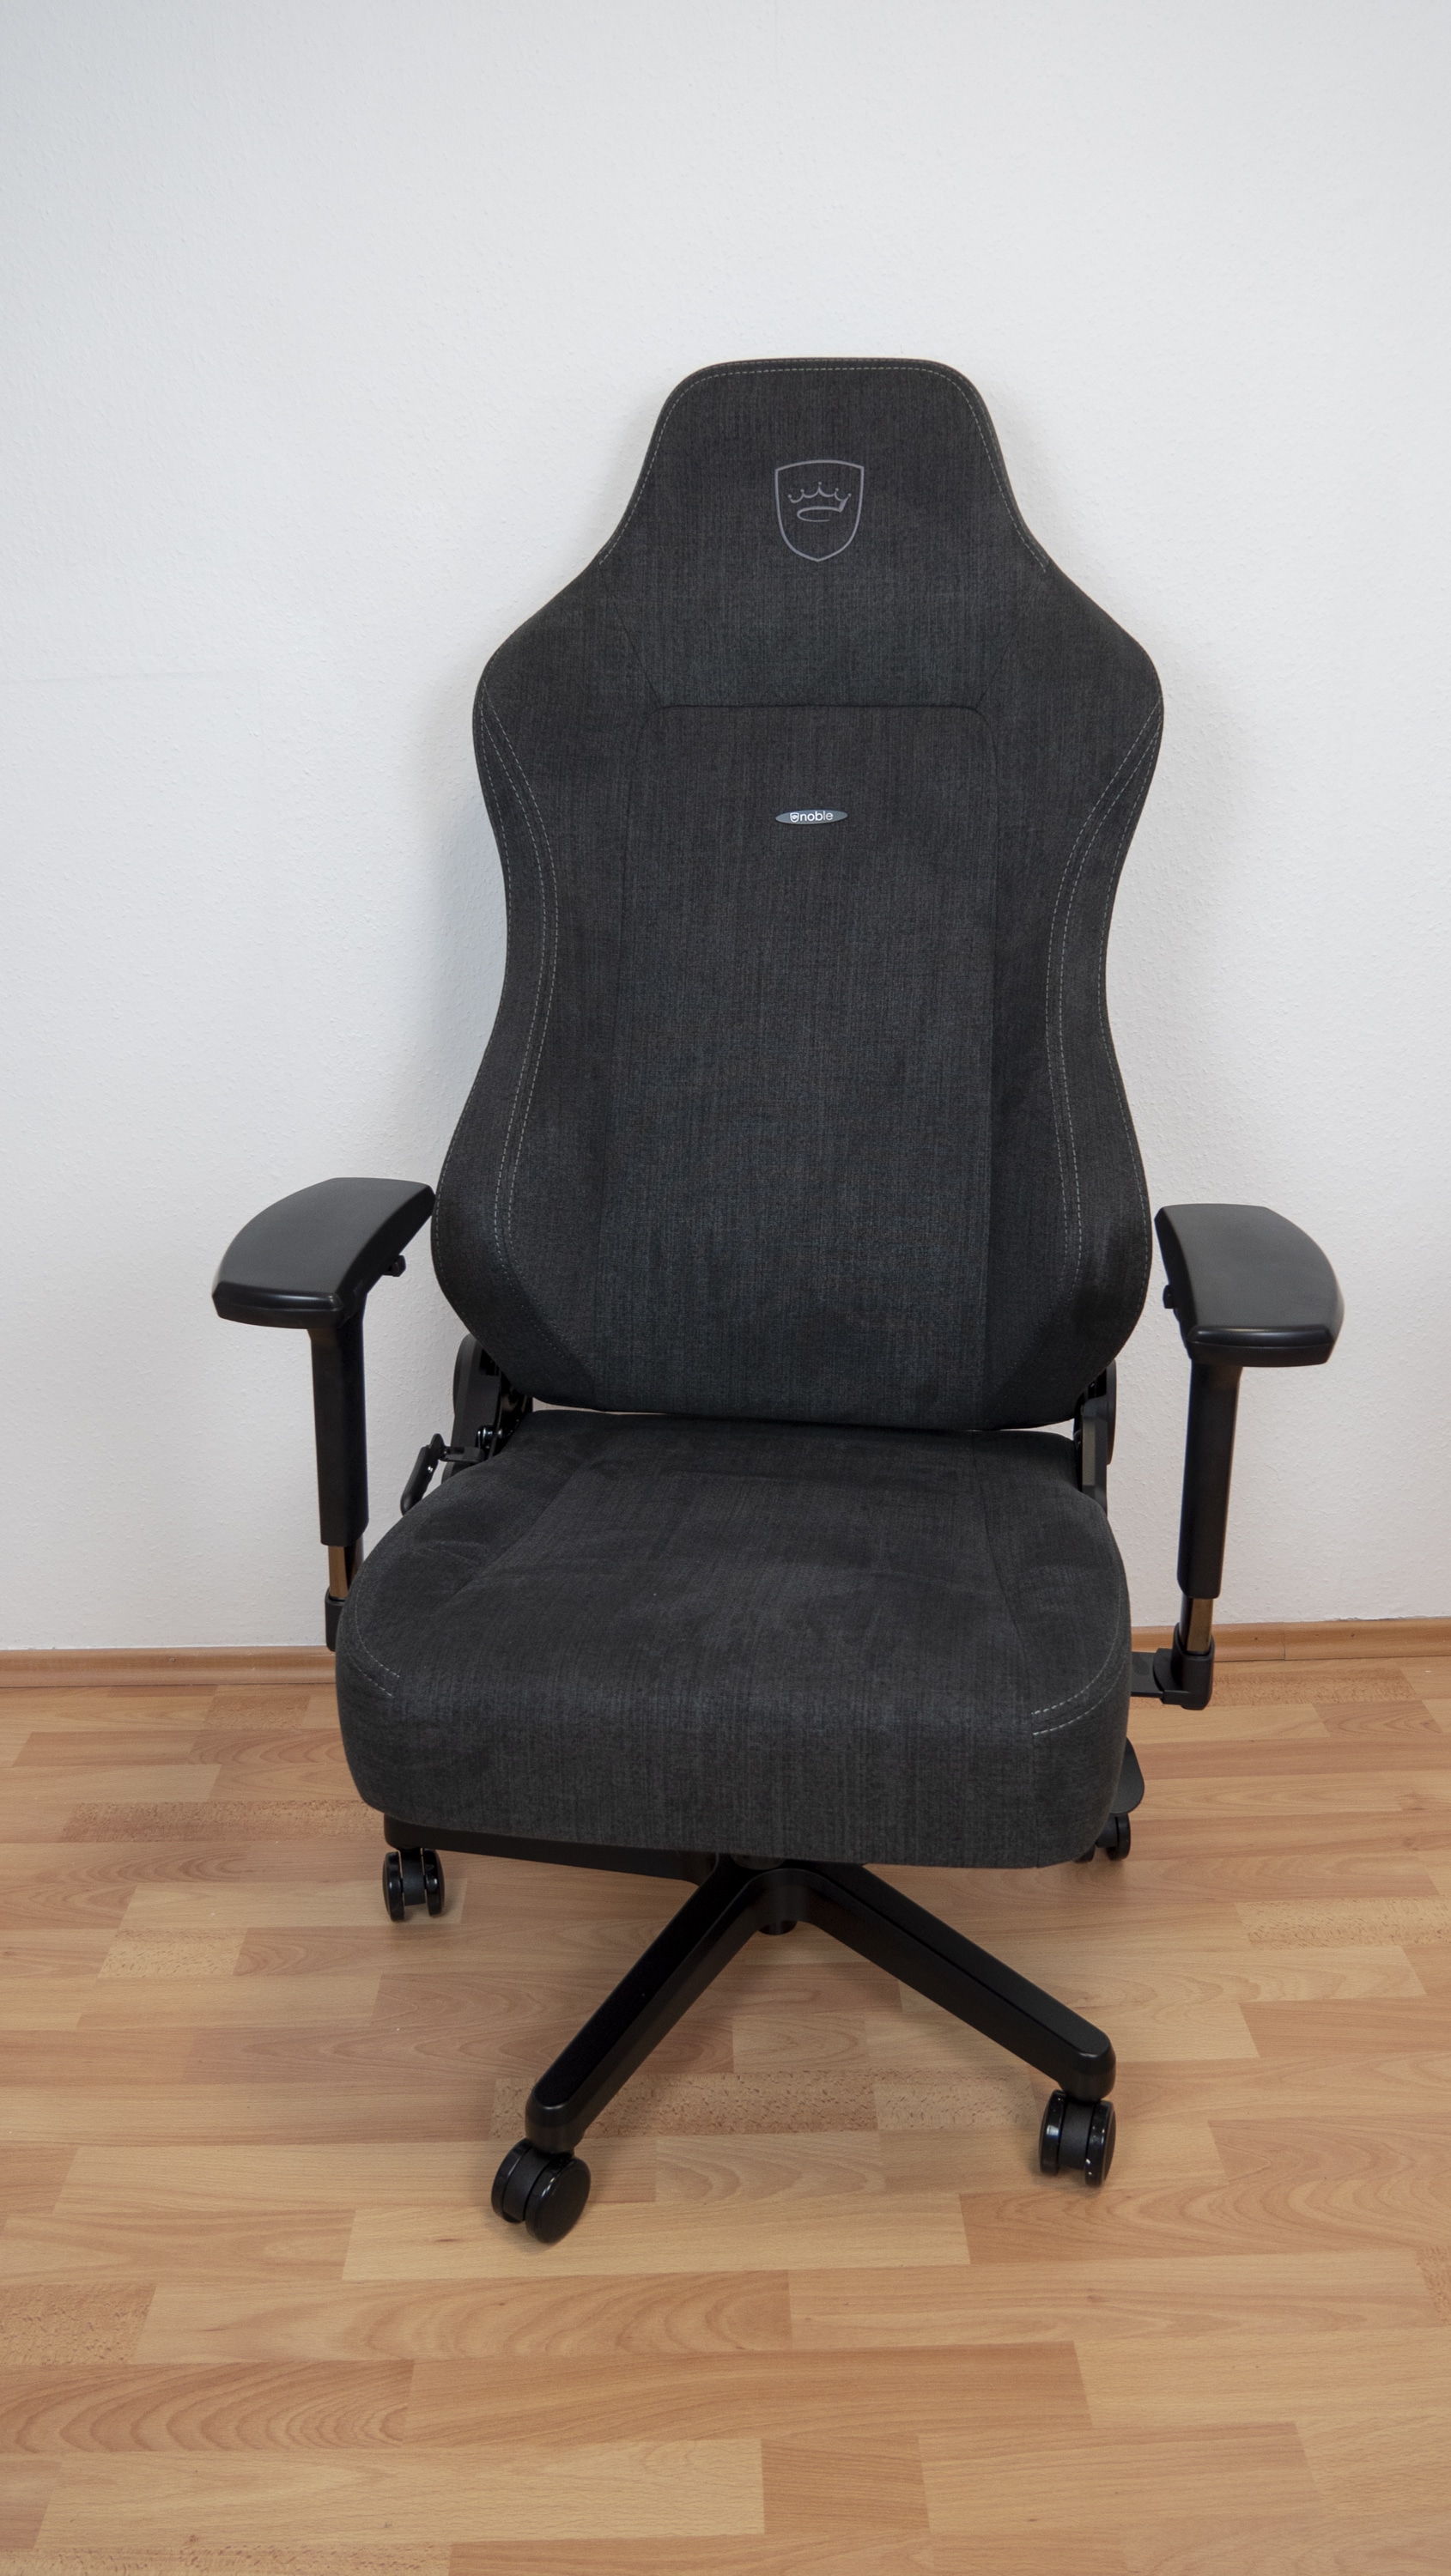 Noblechairs Hero ST TX review: a gaming chair classy enough for the office